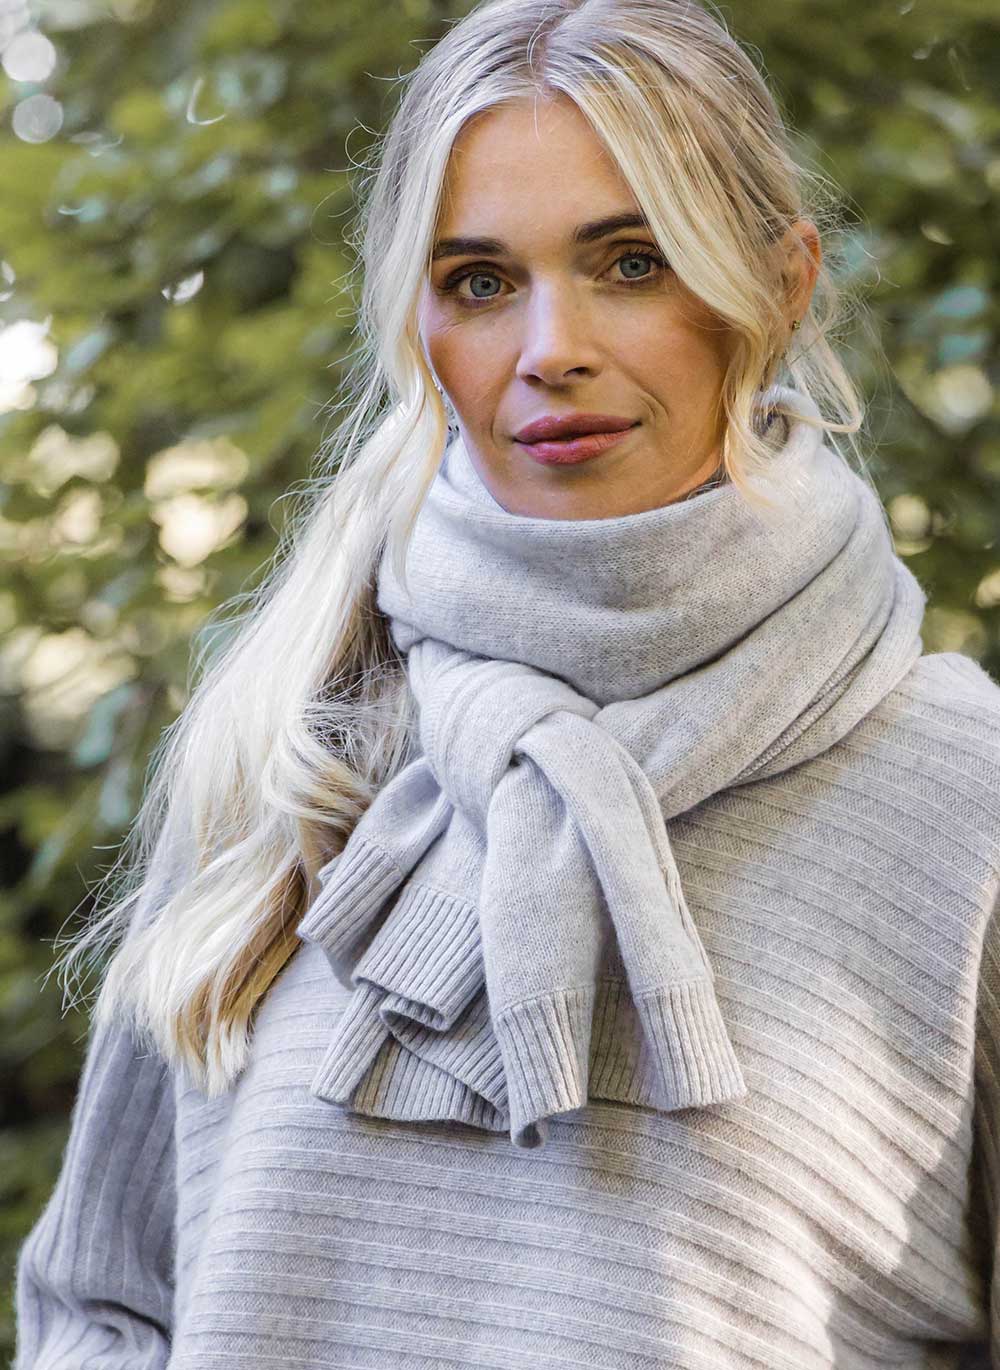 Feminine, Stylish and Affordable Ladies Scarves – The Pretty Scarf Co